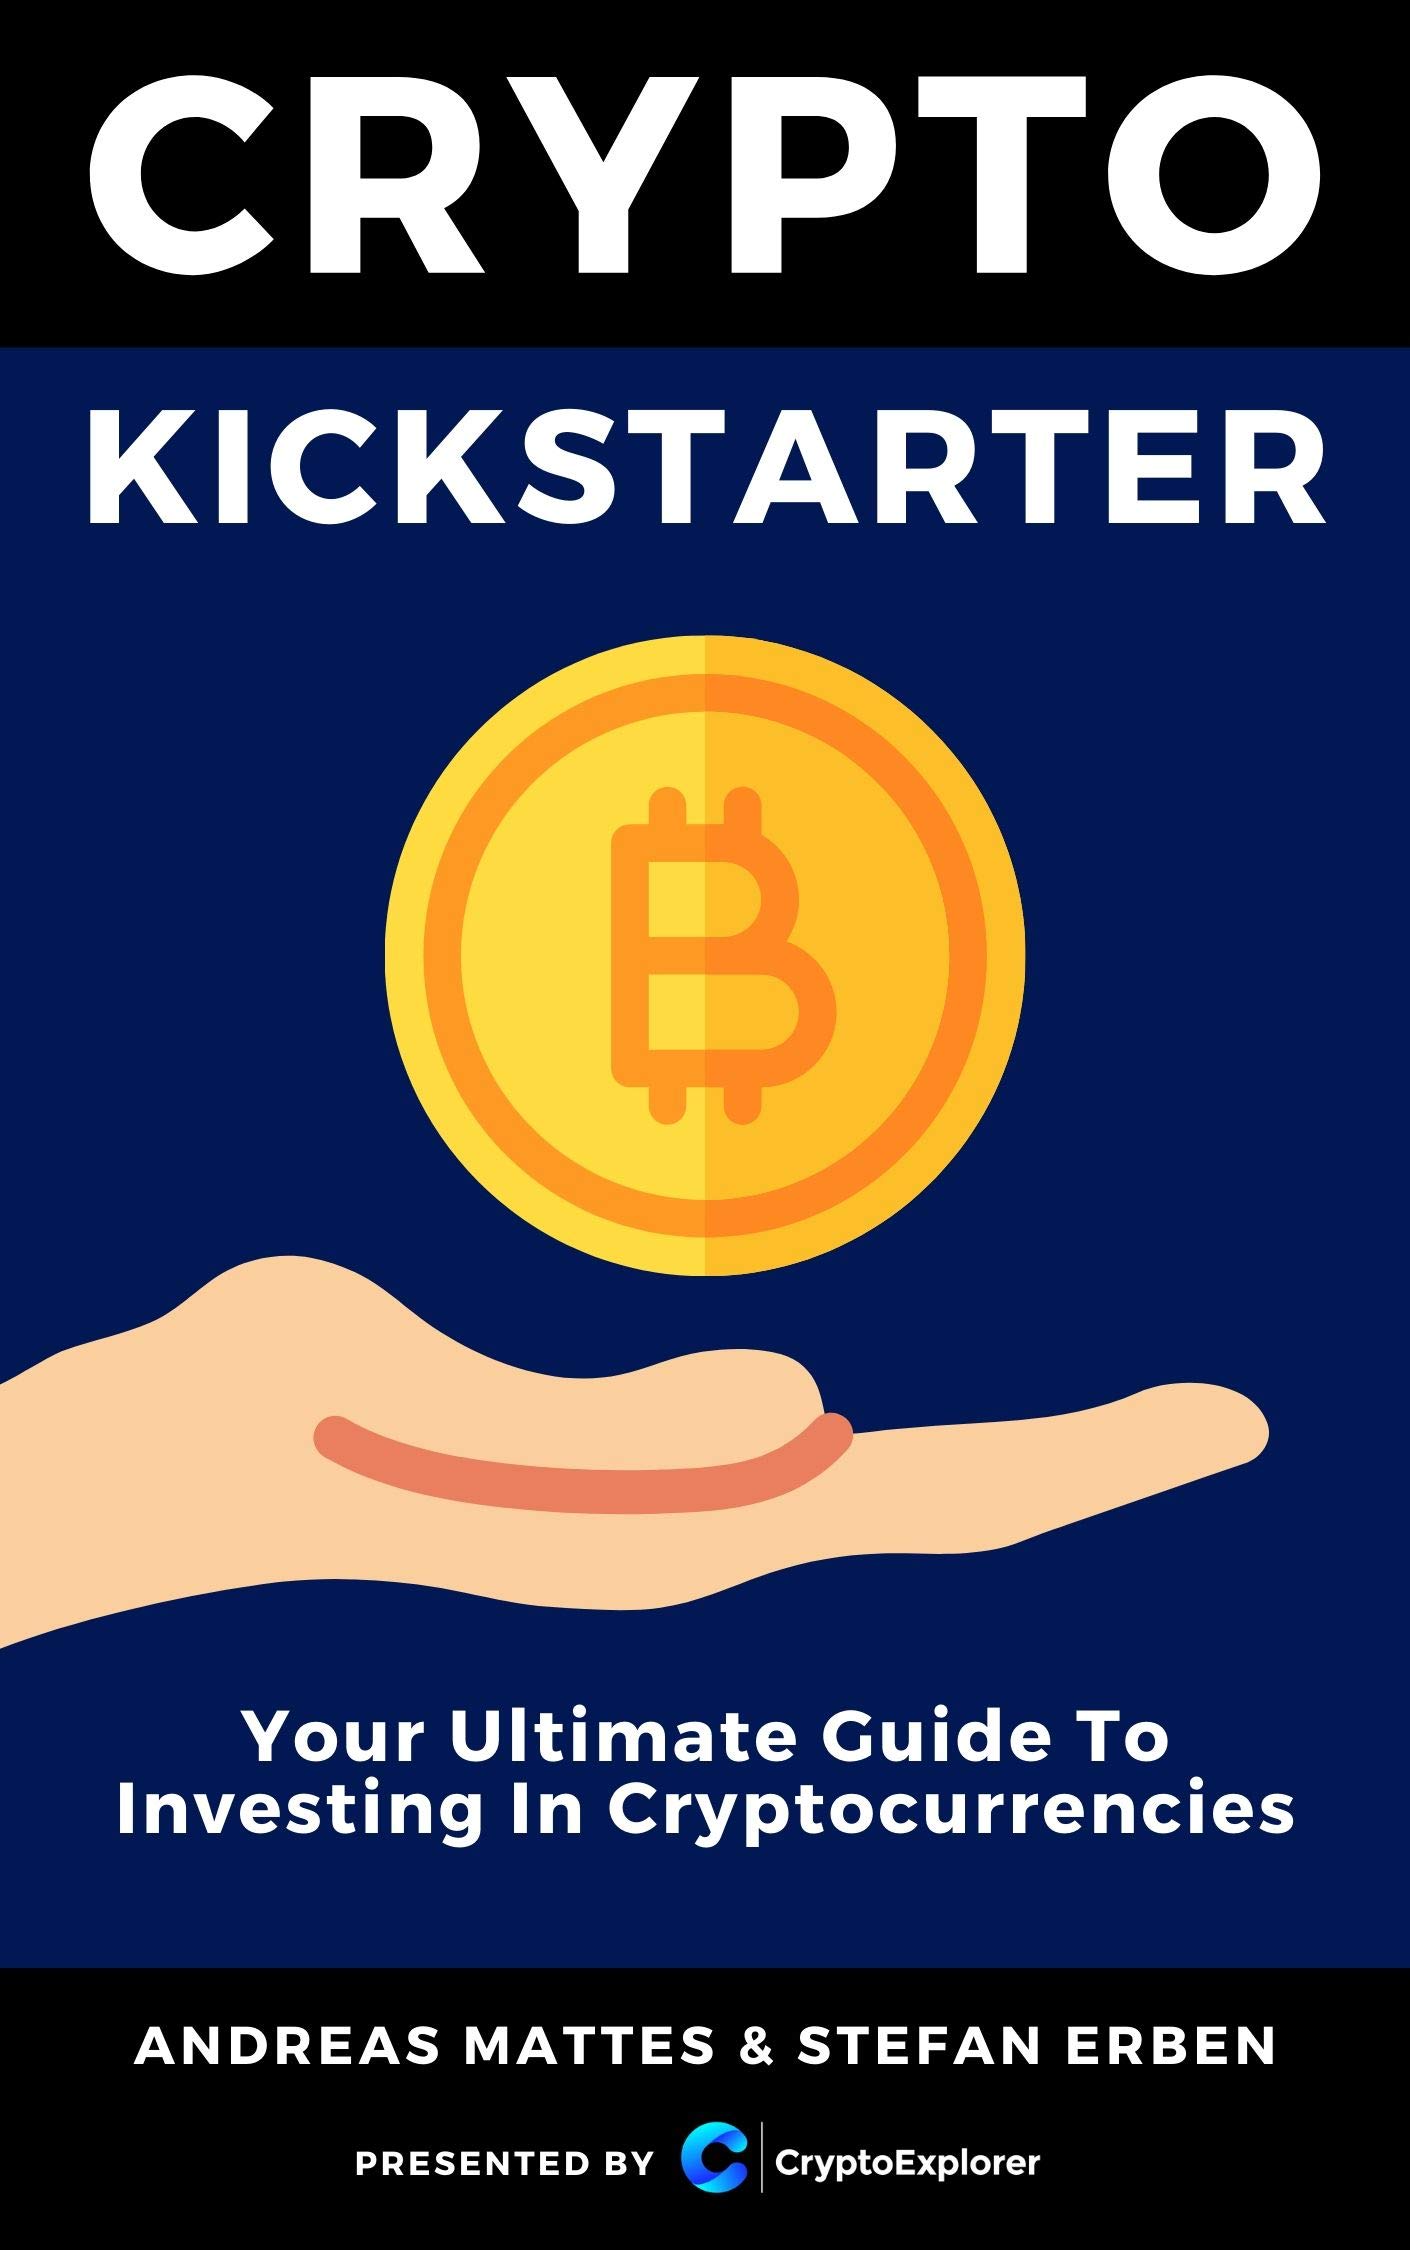 Kickstarter Is Moving to Blockchain – Here’s What You Need to Know